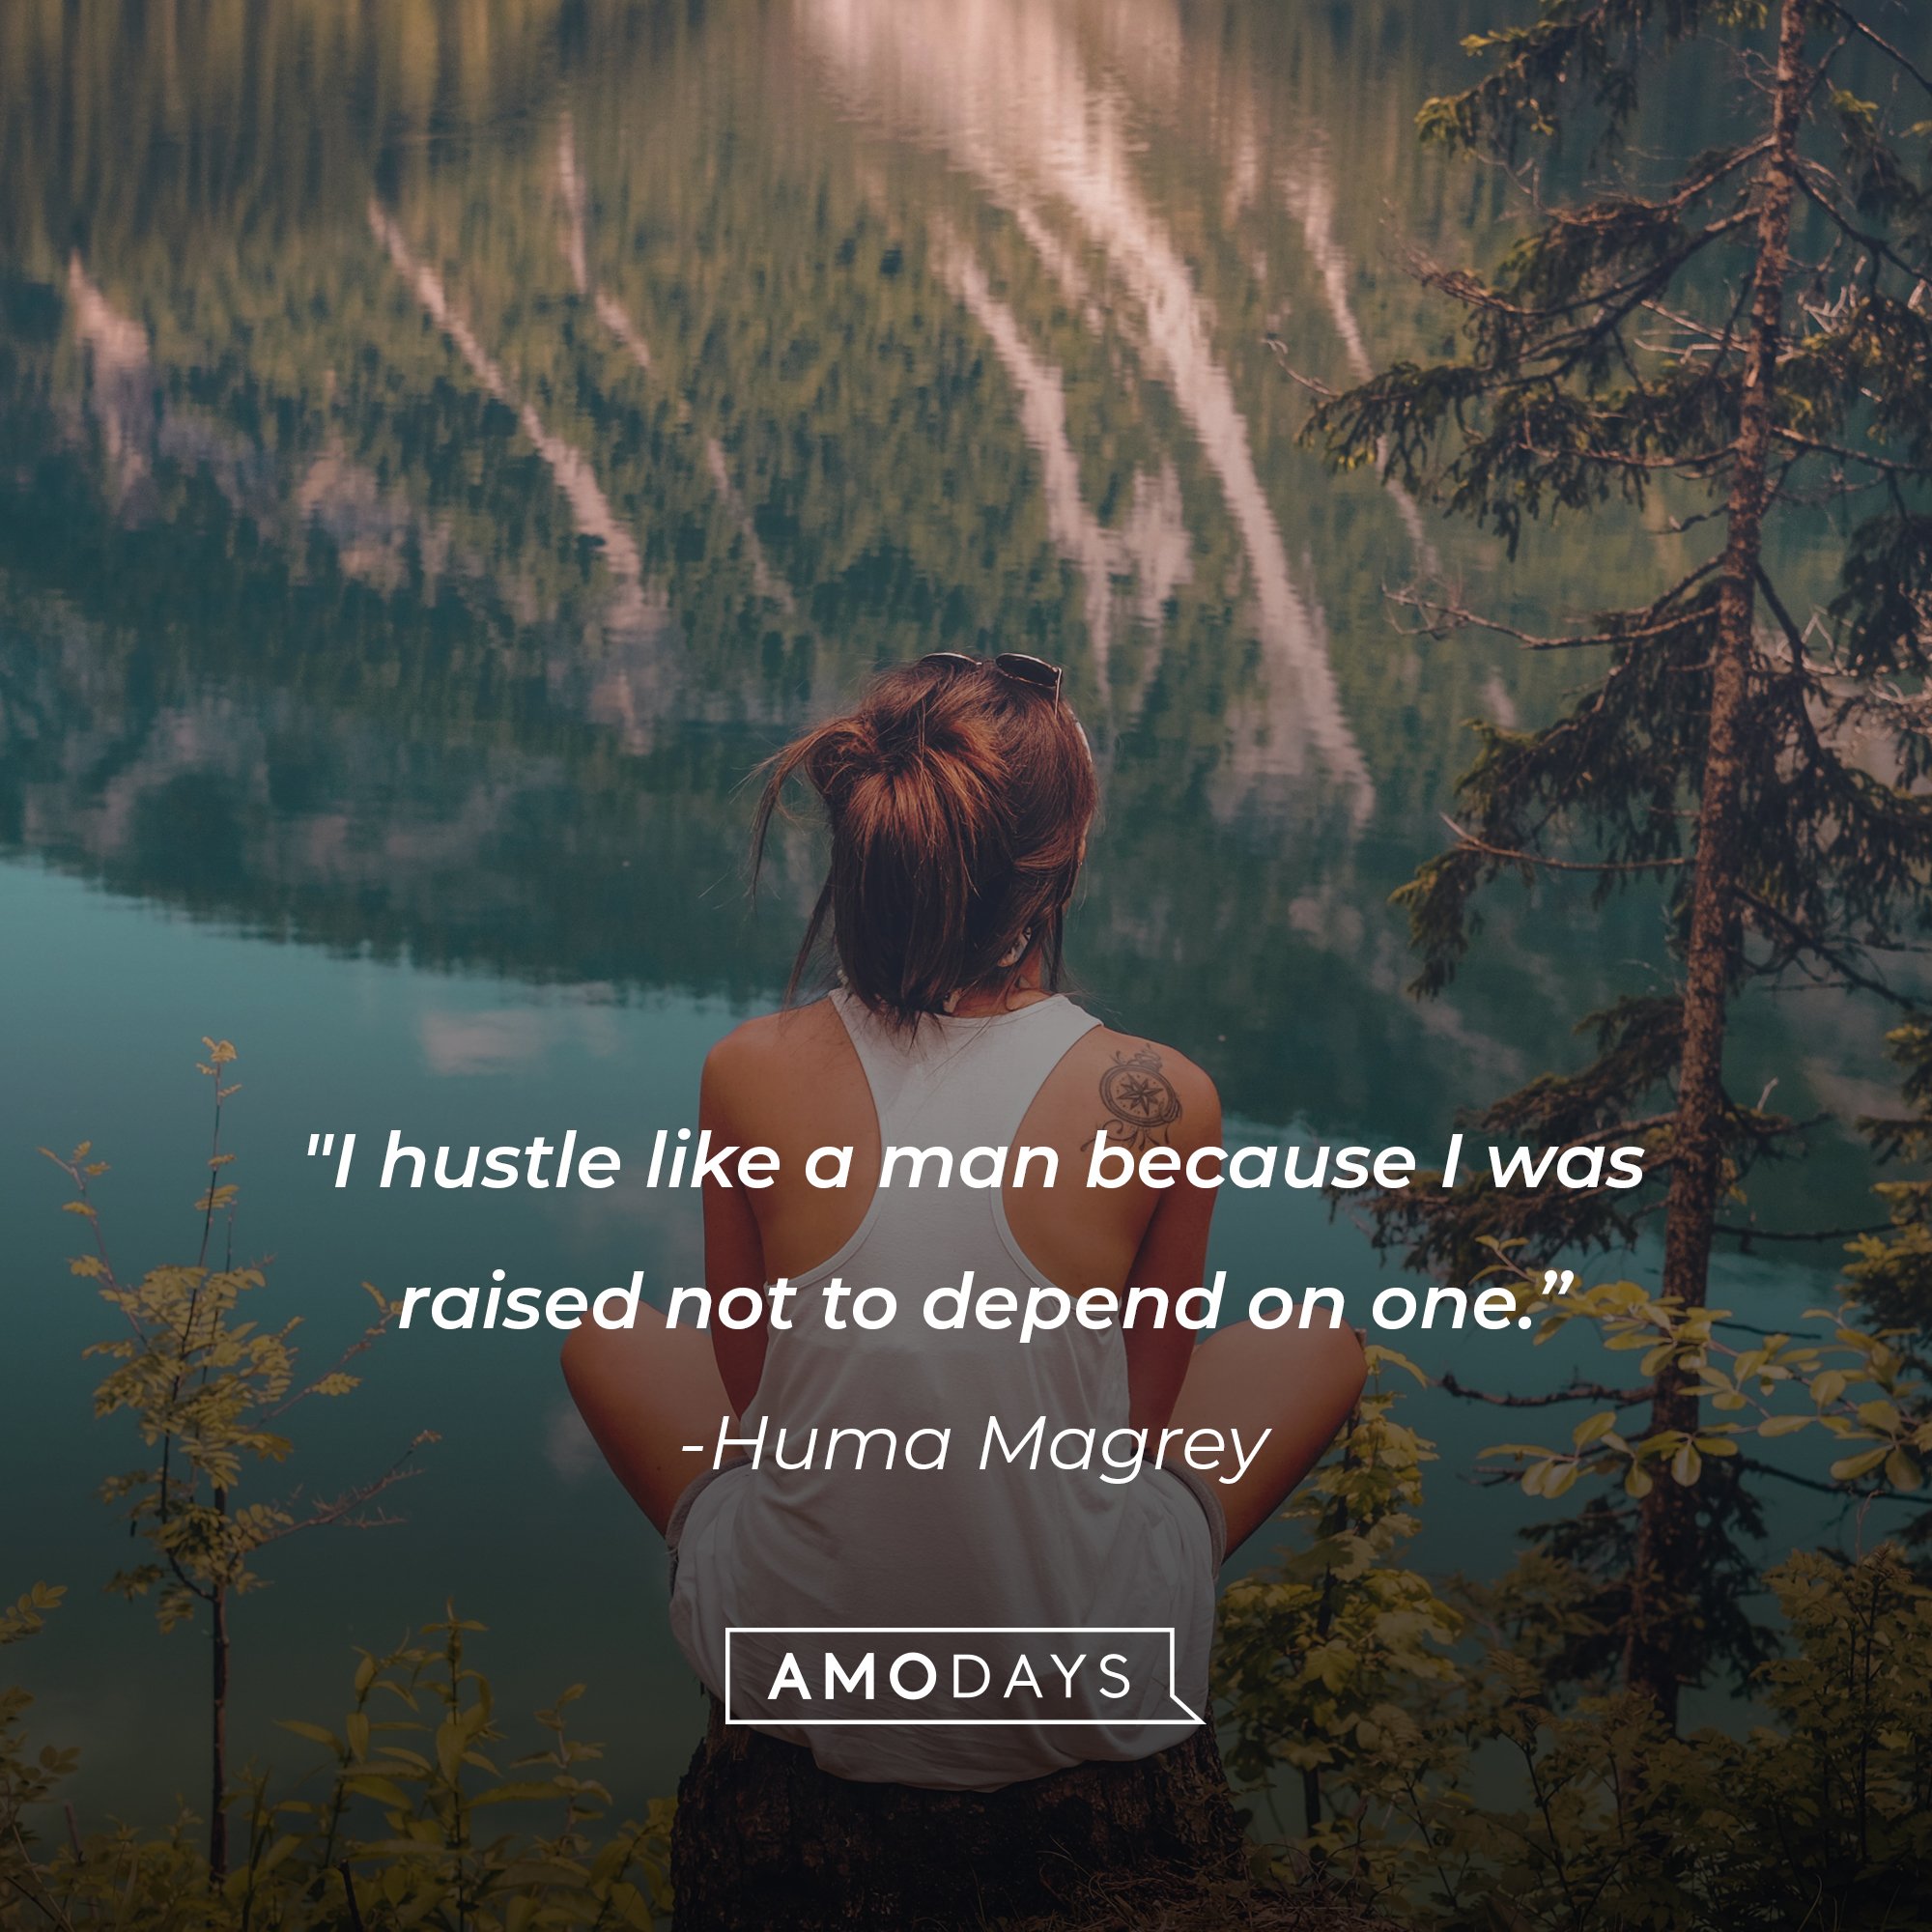 Huma Magrey’s quote: "I hustle like a man because I was raised not to depend on one.” | Image: AmoDays